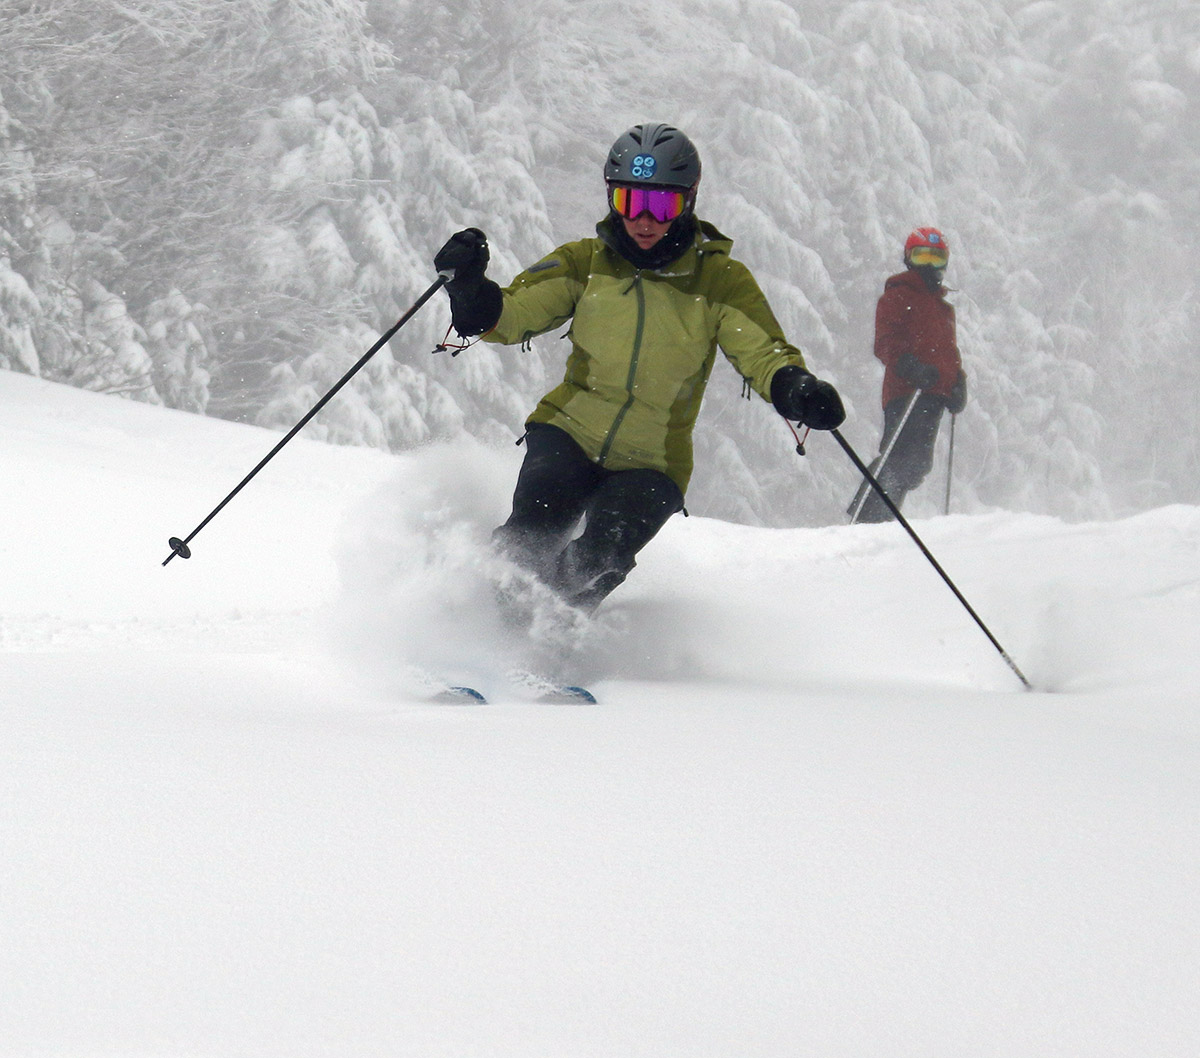 An image of Erica getting some powder turns and Dylan looking on from behind during Winter Storm Jacob at Bolton Valley Ski Resort in Vermont